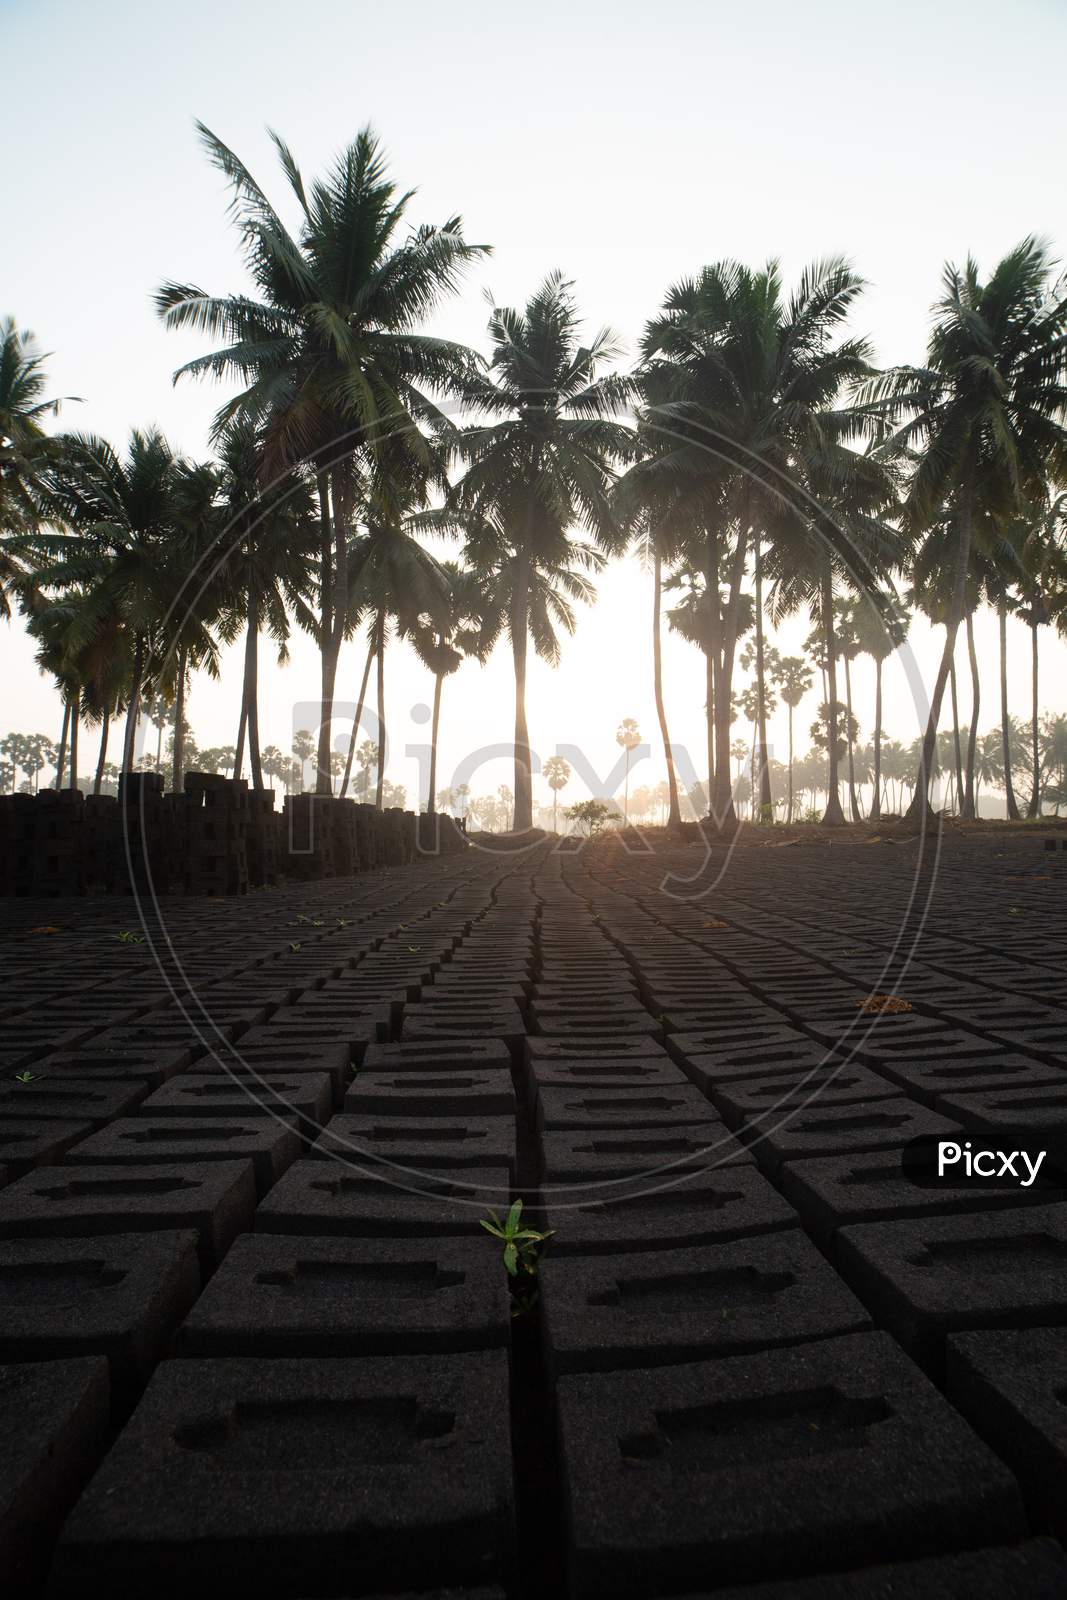 View of Coconut trees in Palakollu during sunrise